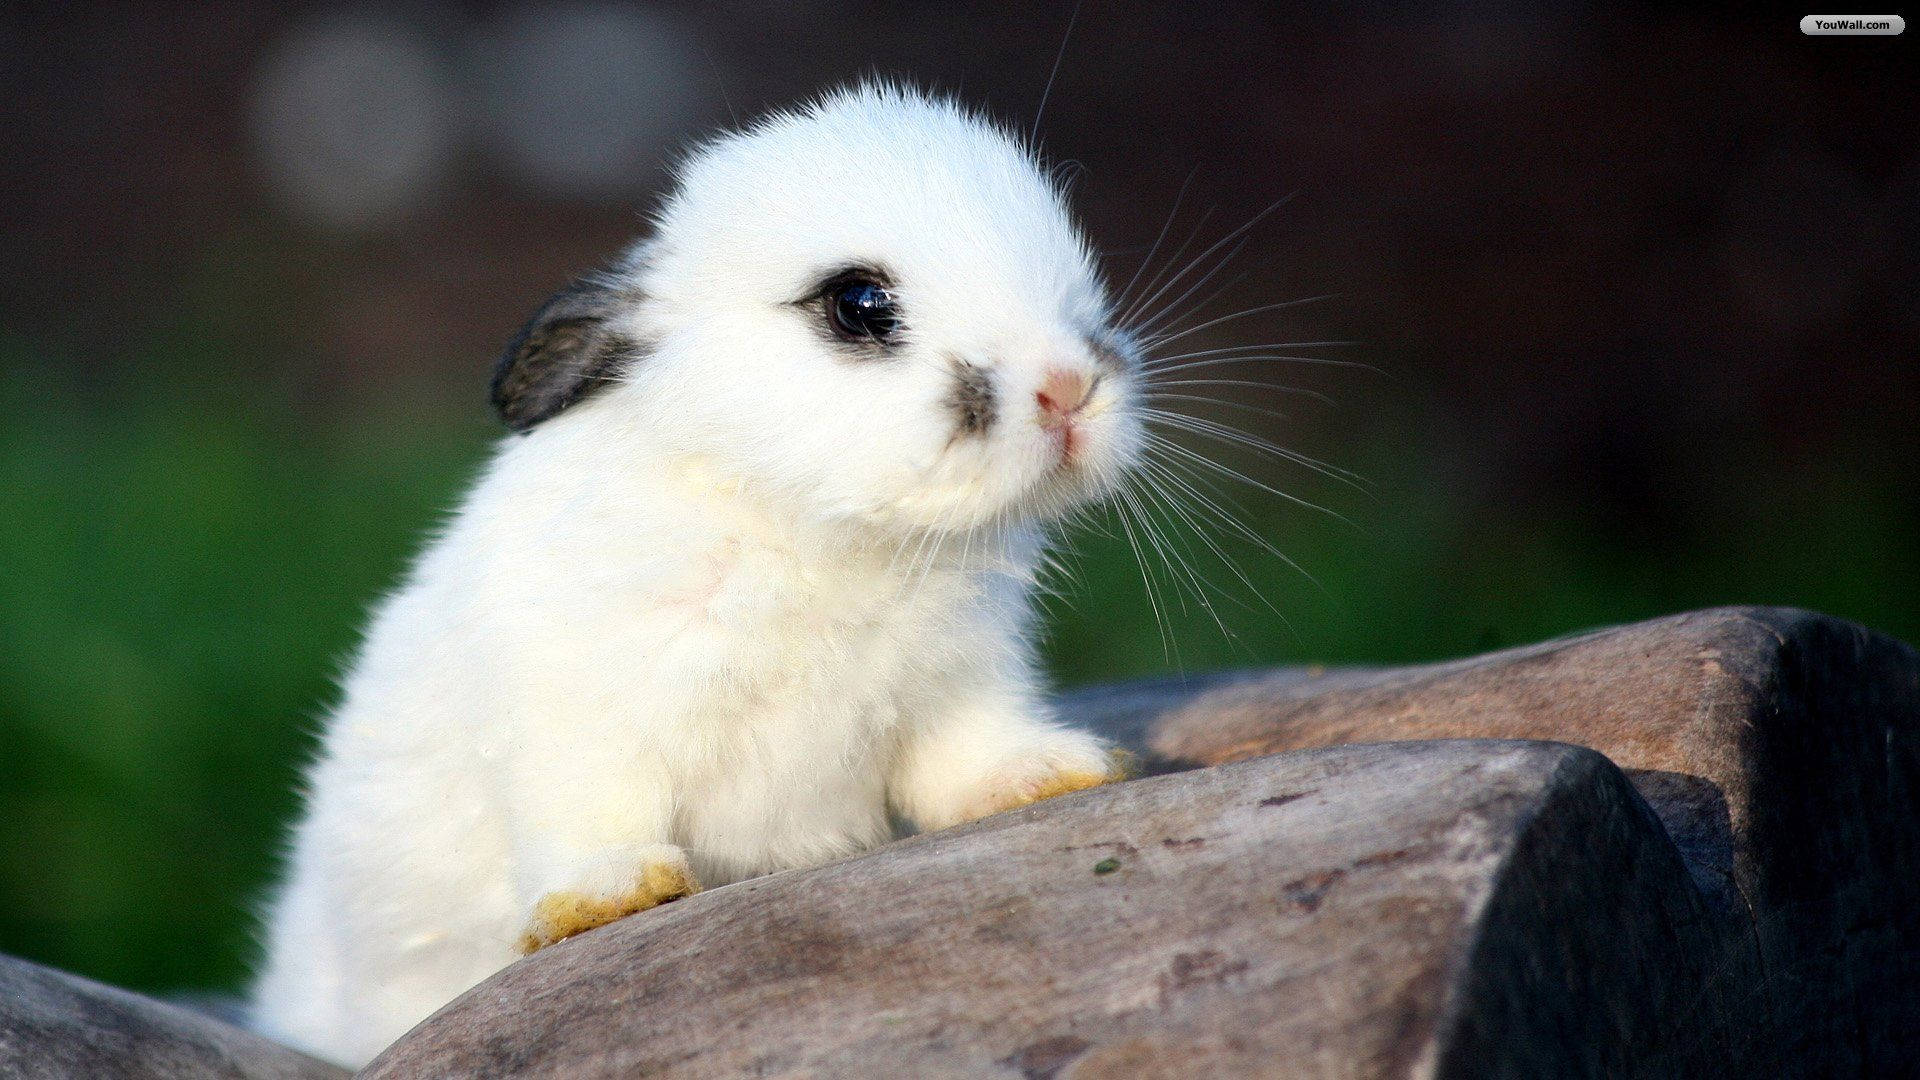 A Little White Bunny Enjoying The Outdoors Background